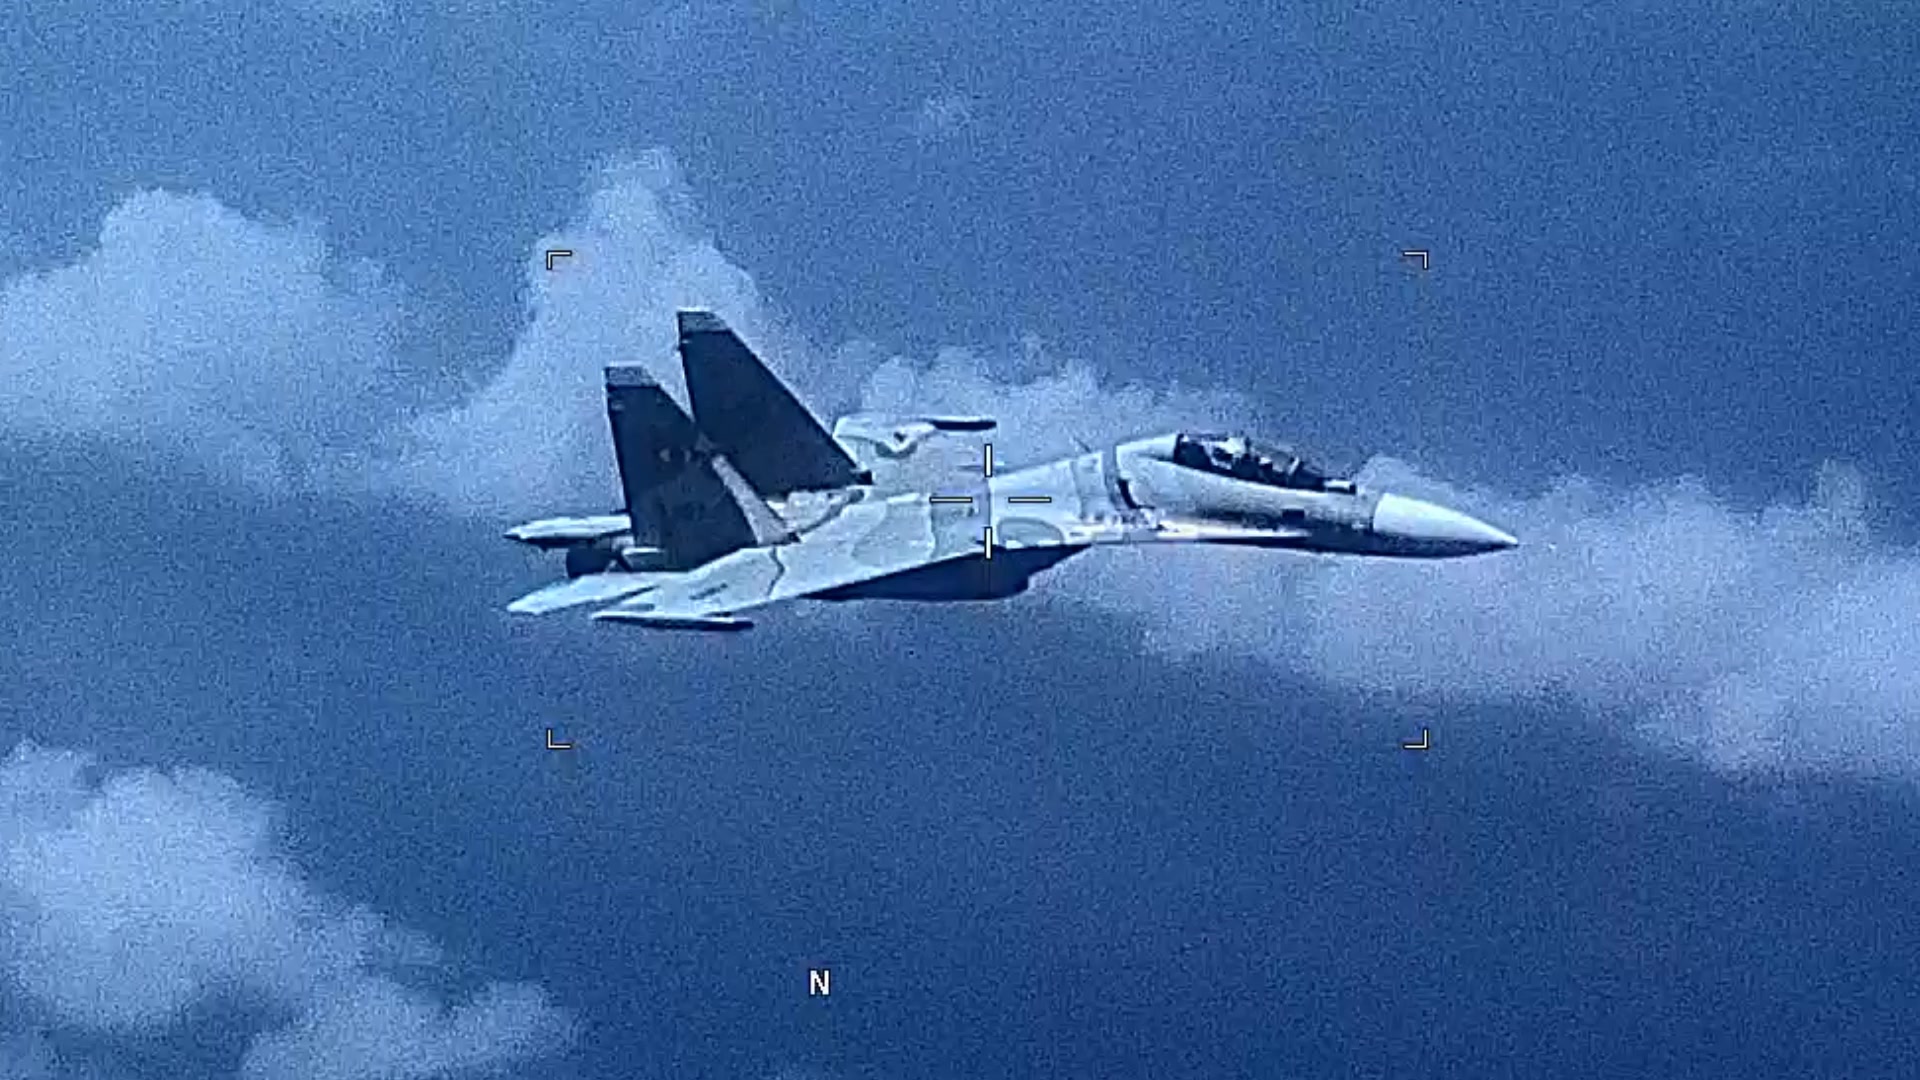 Video of Venezuela SU-30 Flanker as it “aggressively shadowed” a U.S. EP-3 Aries II at an unsafe distance in international airspace over the Caribbean Sea July 19, jeopardizing the crew and aircraft. The EP-3 aircraft, flying a mission in approved international airspace was approached in an unprofessional manner by the SU-30 that took off from an airfield 200 miles east of Caracas. The U.S. routinely conducts multi-nationally recognized and approved detection and monitoring missions in the region to ensure the safety and security of our citizens and those of our partners. (Released by U.S. Southern Command)